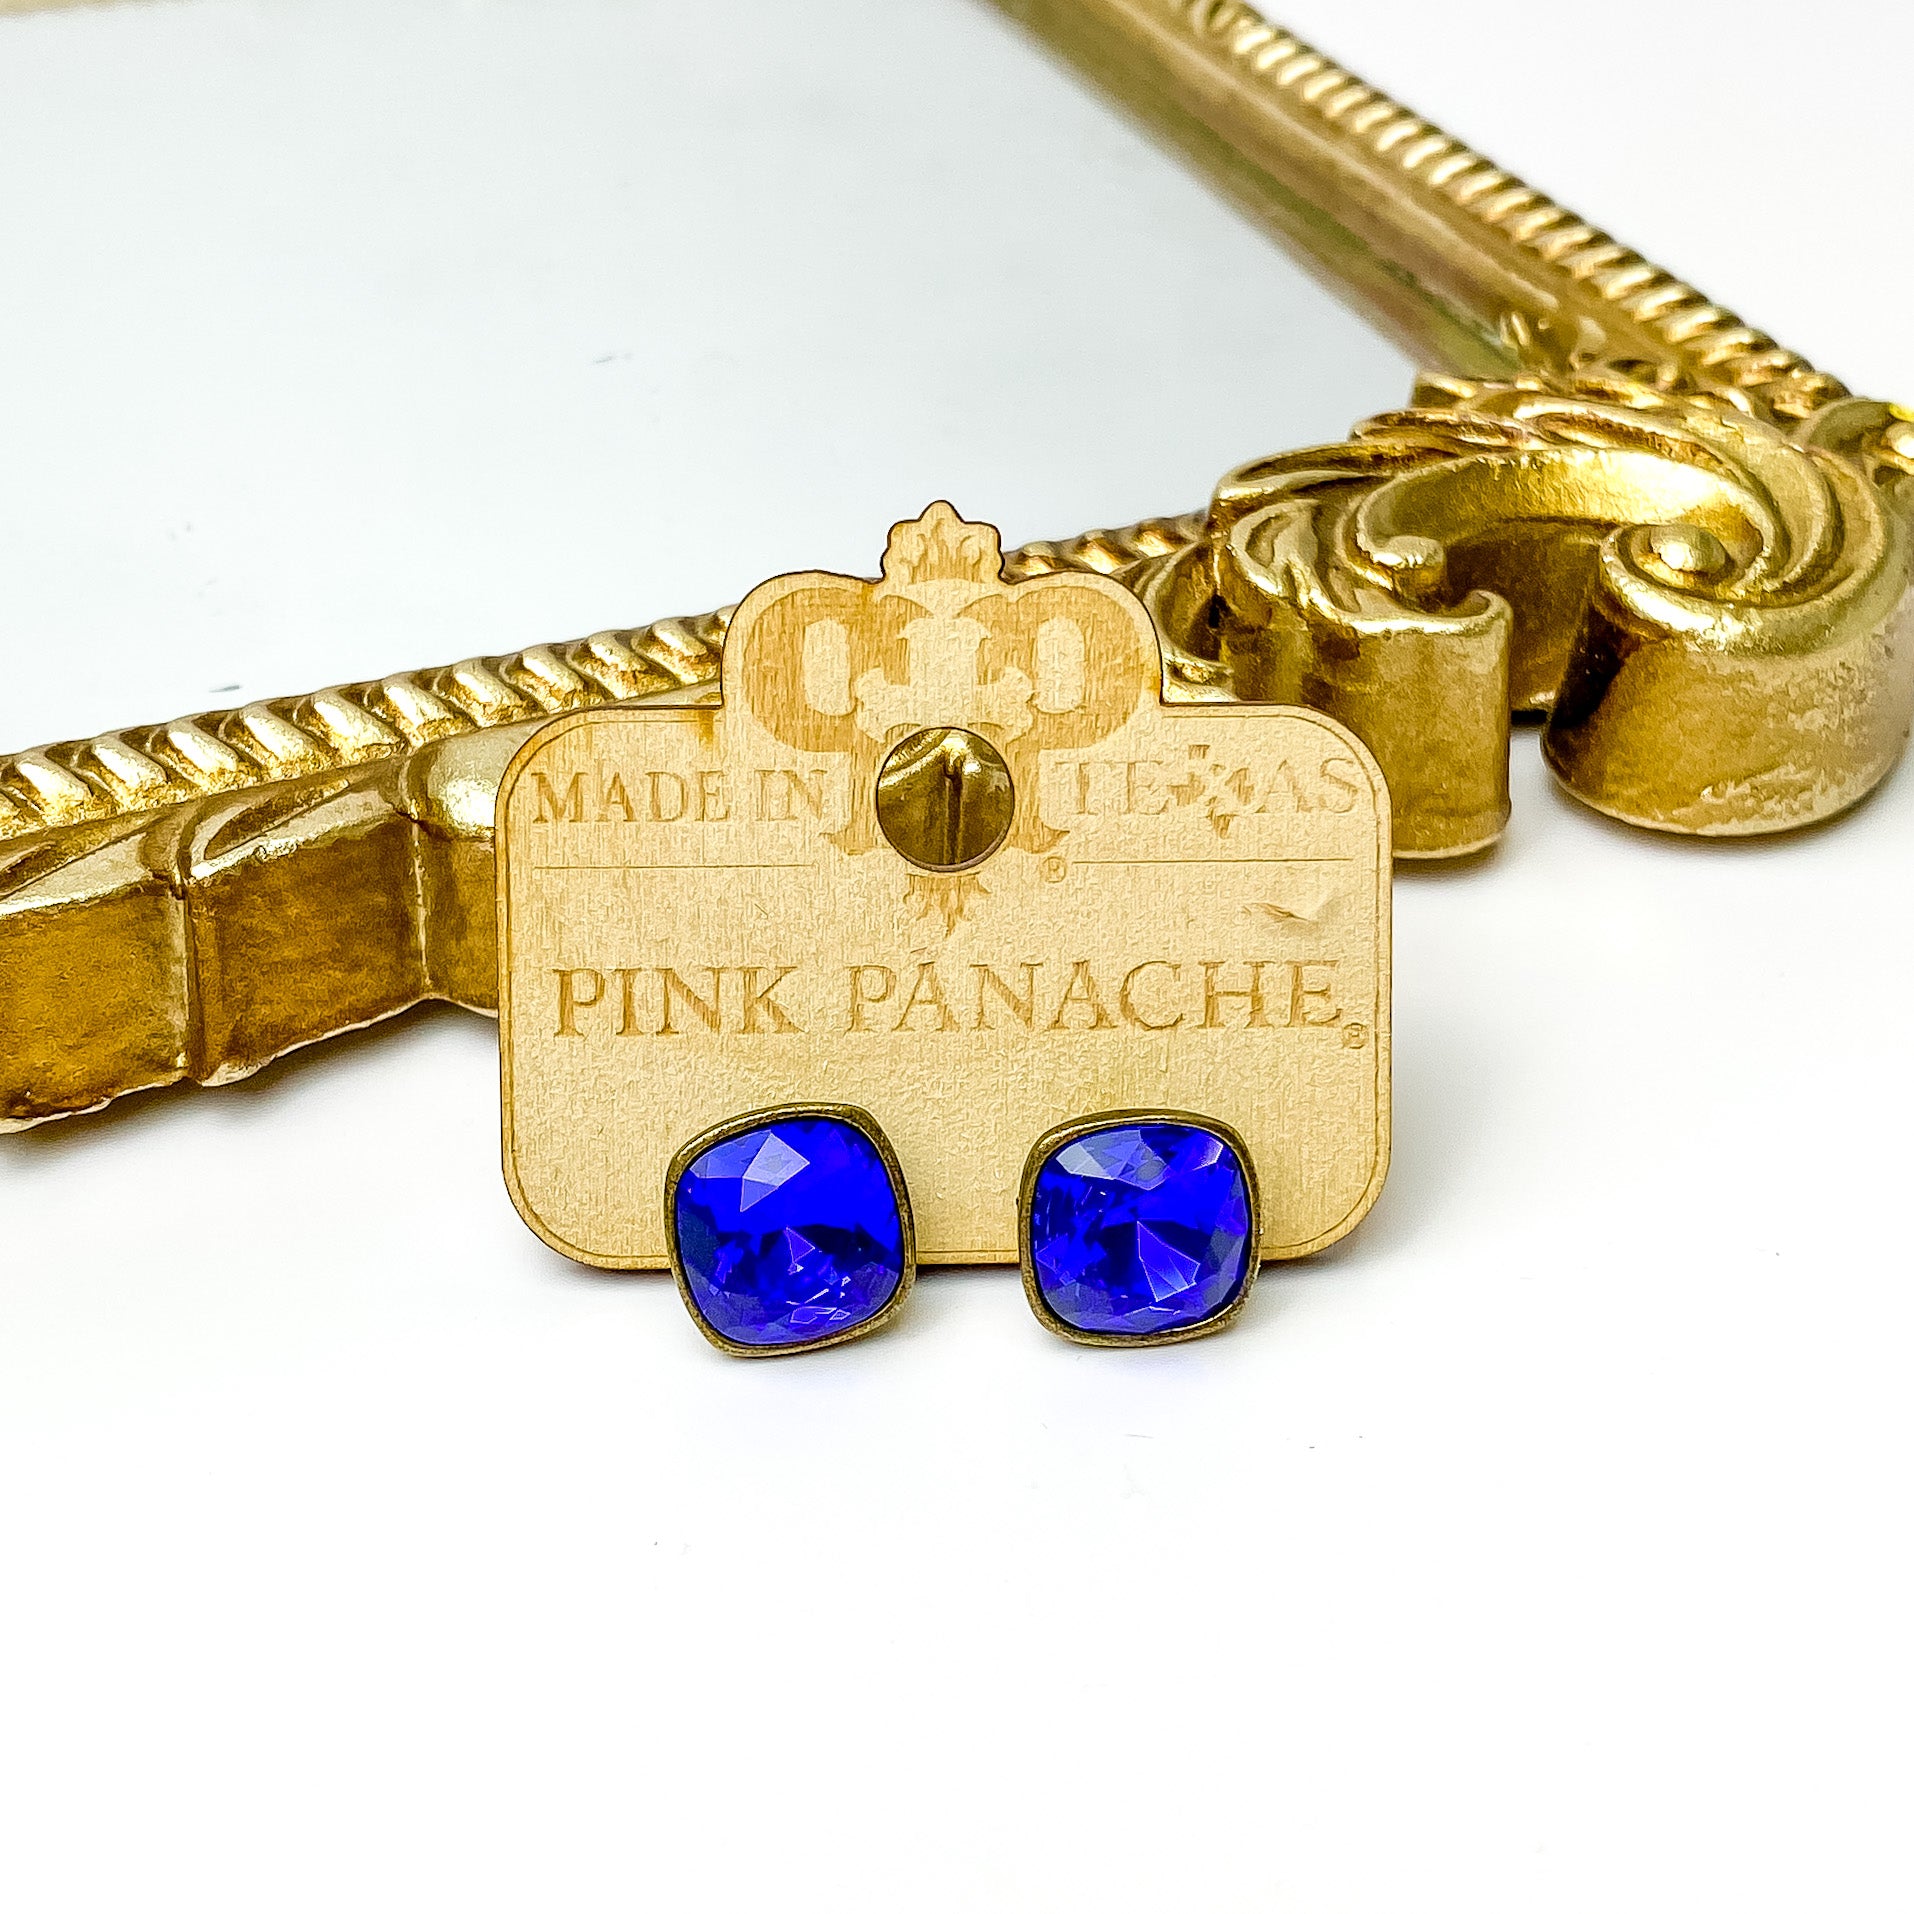 Majestic blue cushion cut crystal stud earrings with a silver setting. These earrings are pictured on a Pink Panache wood holder in front of a gold mirror and on a white background.